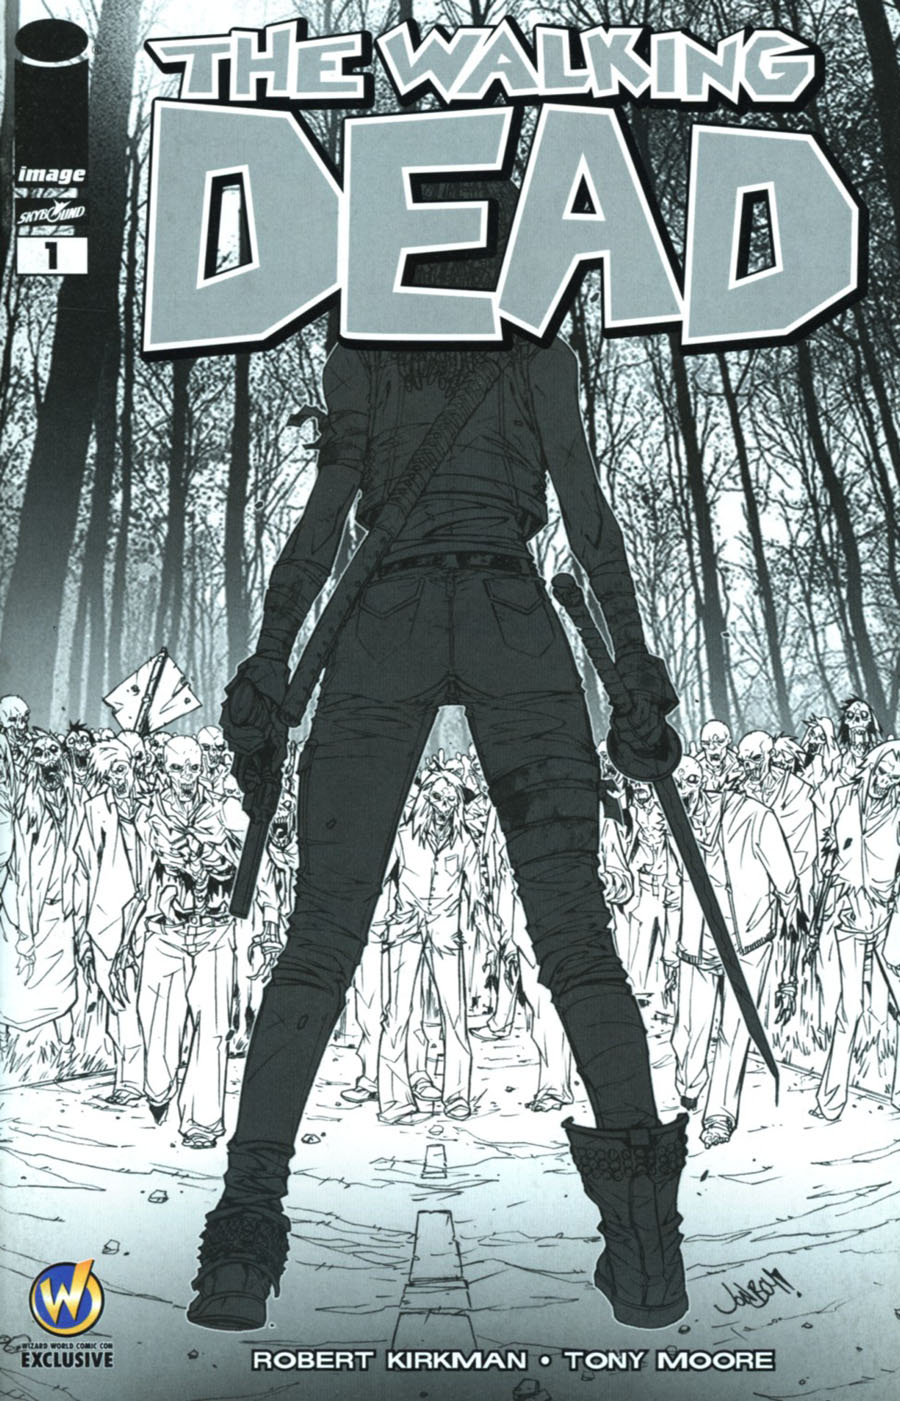 Walking Dead #1 Cover O Wizard World Comic Con Reno VIP Exclusive Jonboy Meyers Sketch Variant Cover